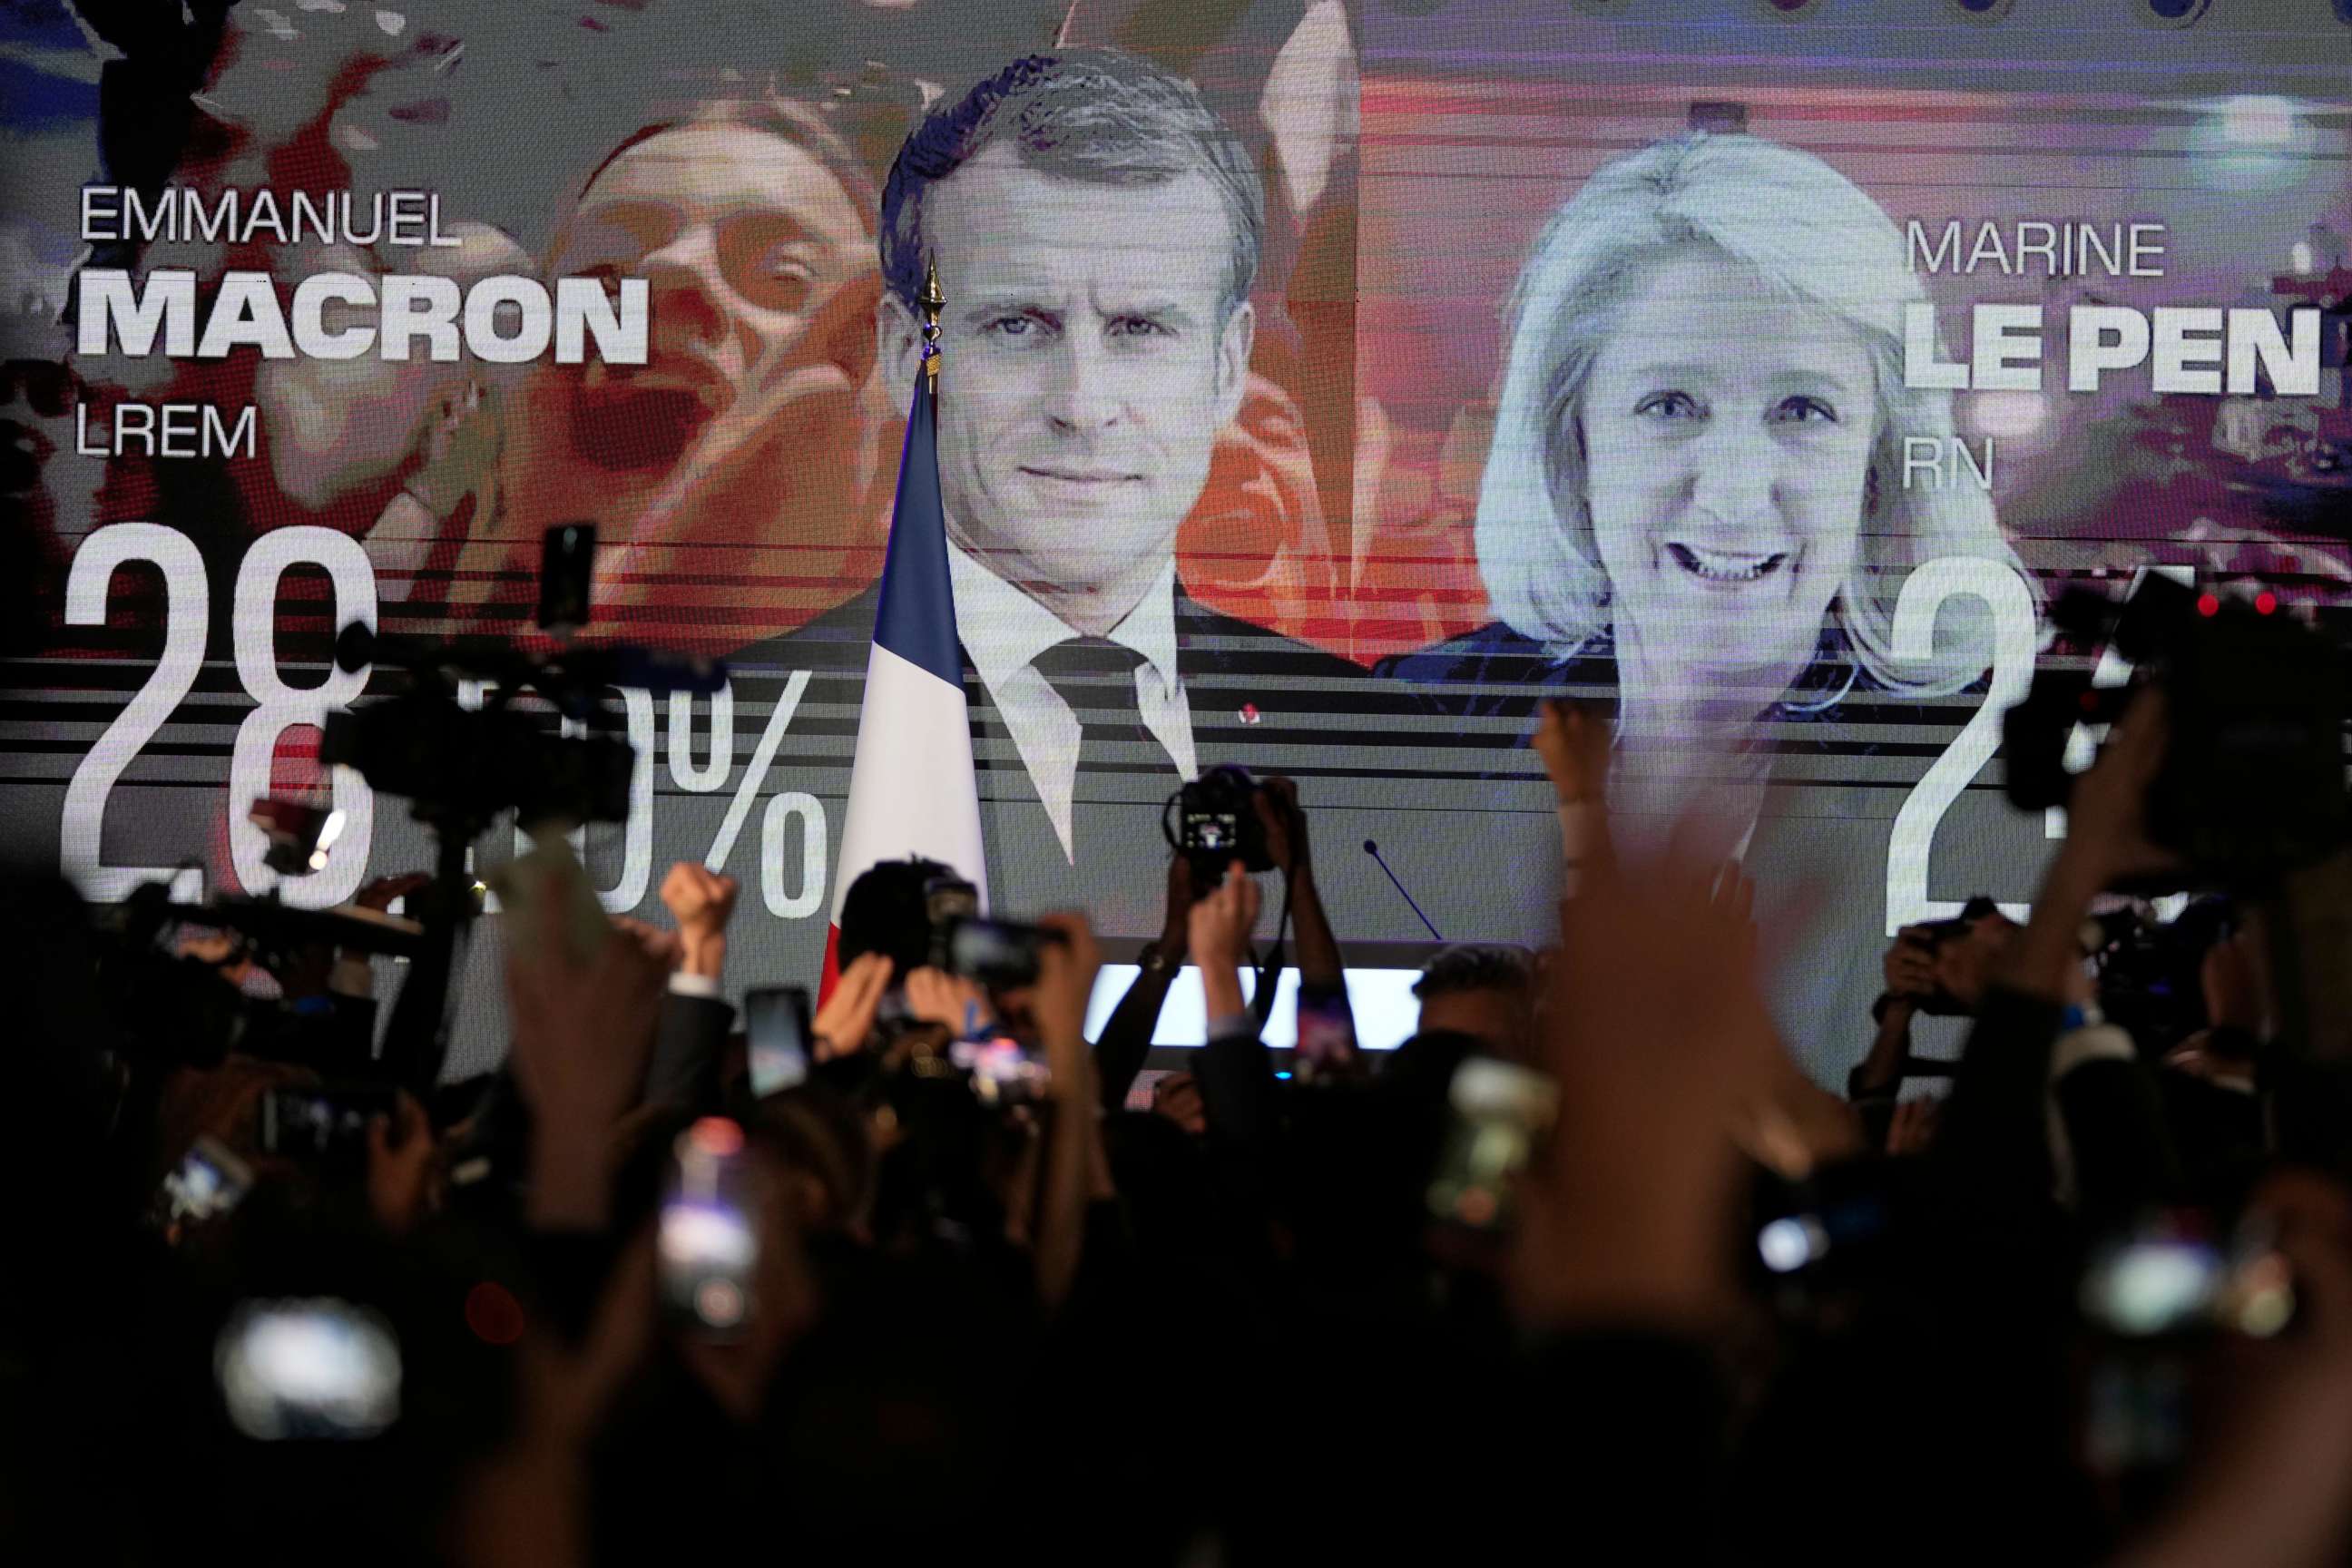 PHOTO: A screen shows French President Emmanuel Macron, centrist candidate for reelection, alongside far-right candidate Marine Le Pen at her election day headquarters, in Paris, April 10, 2022.